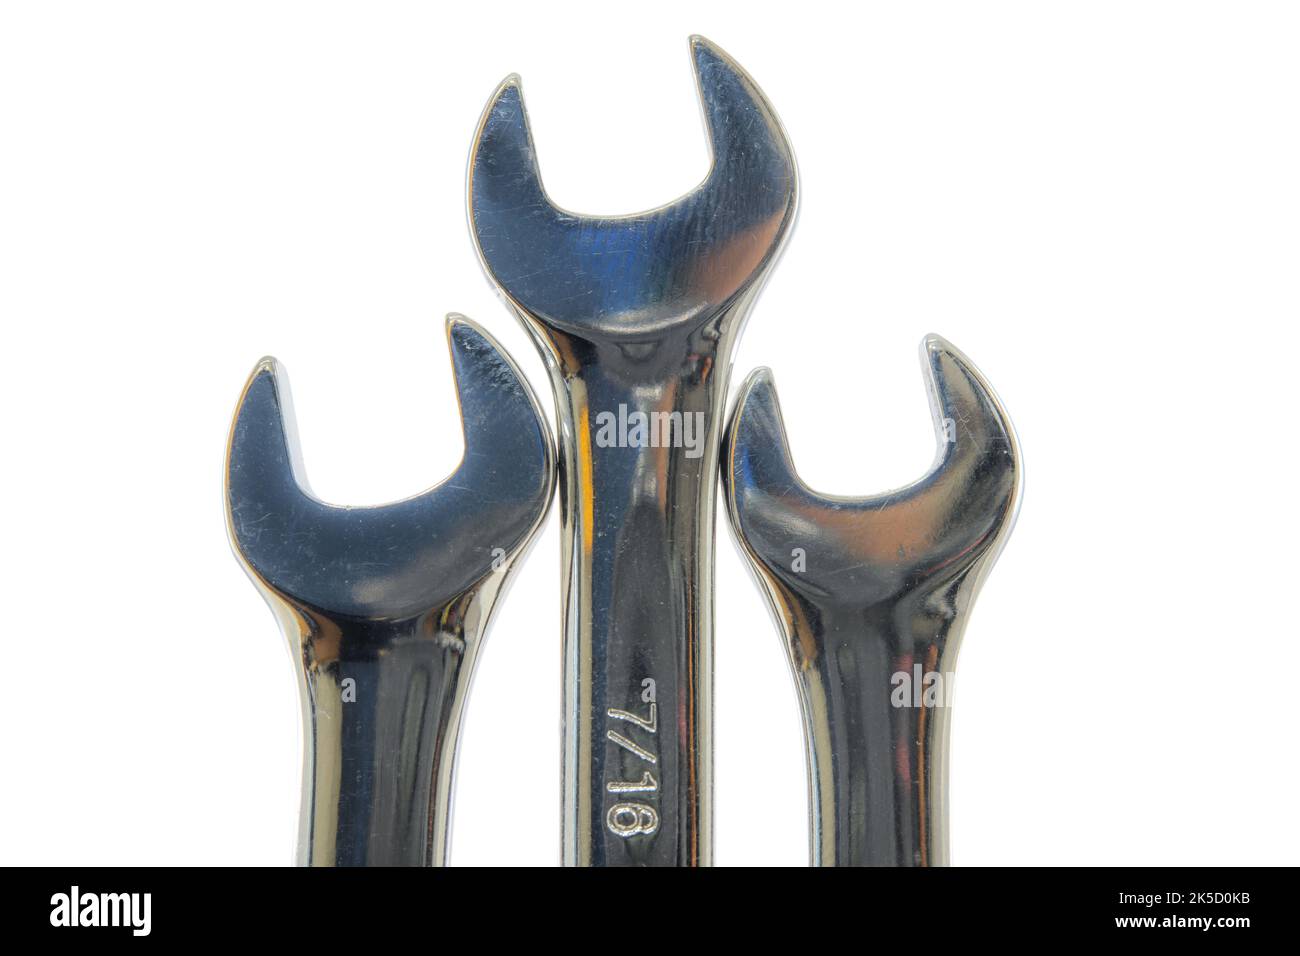 group of spanner wrenches Stock Photo